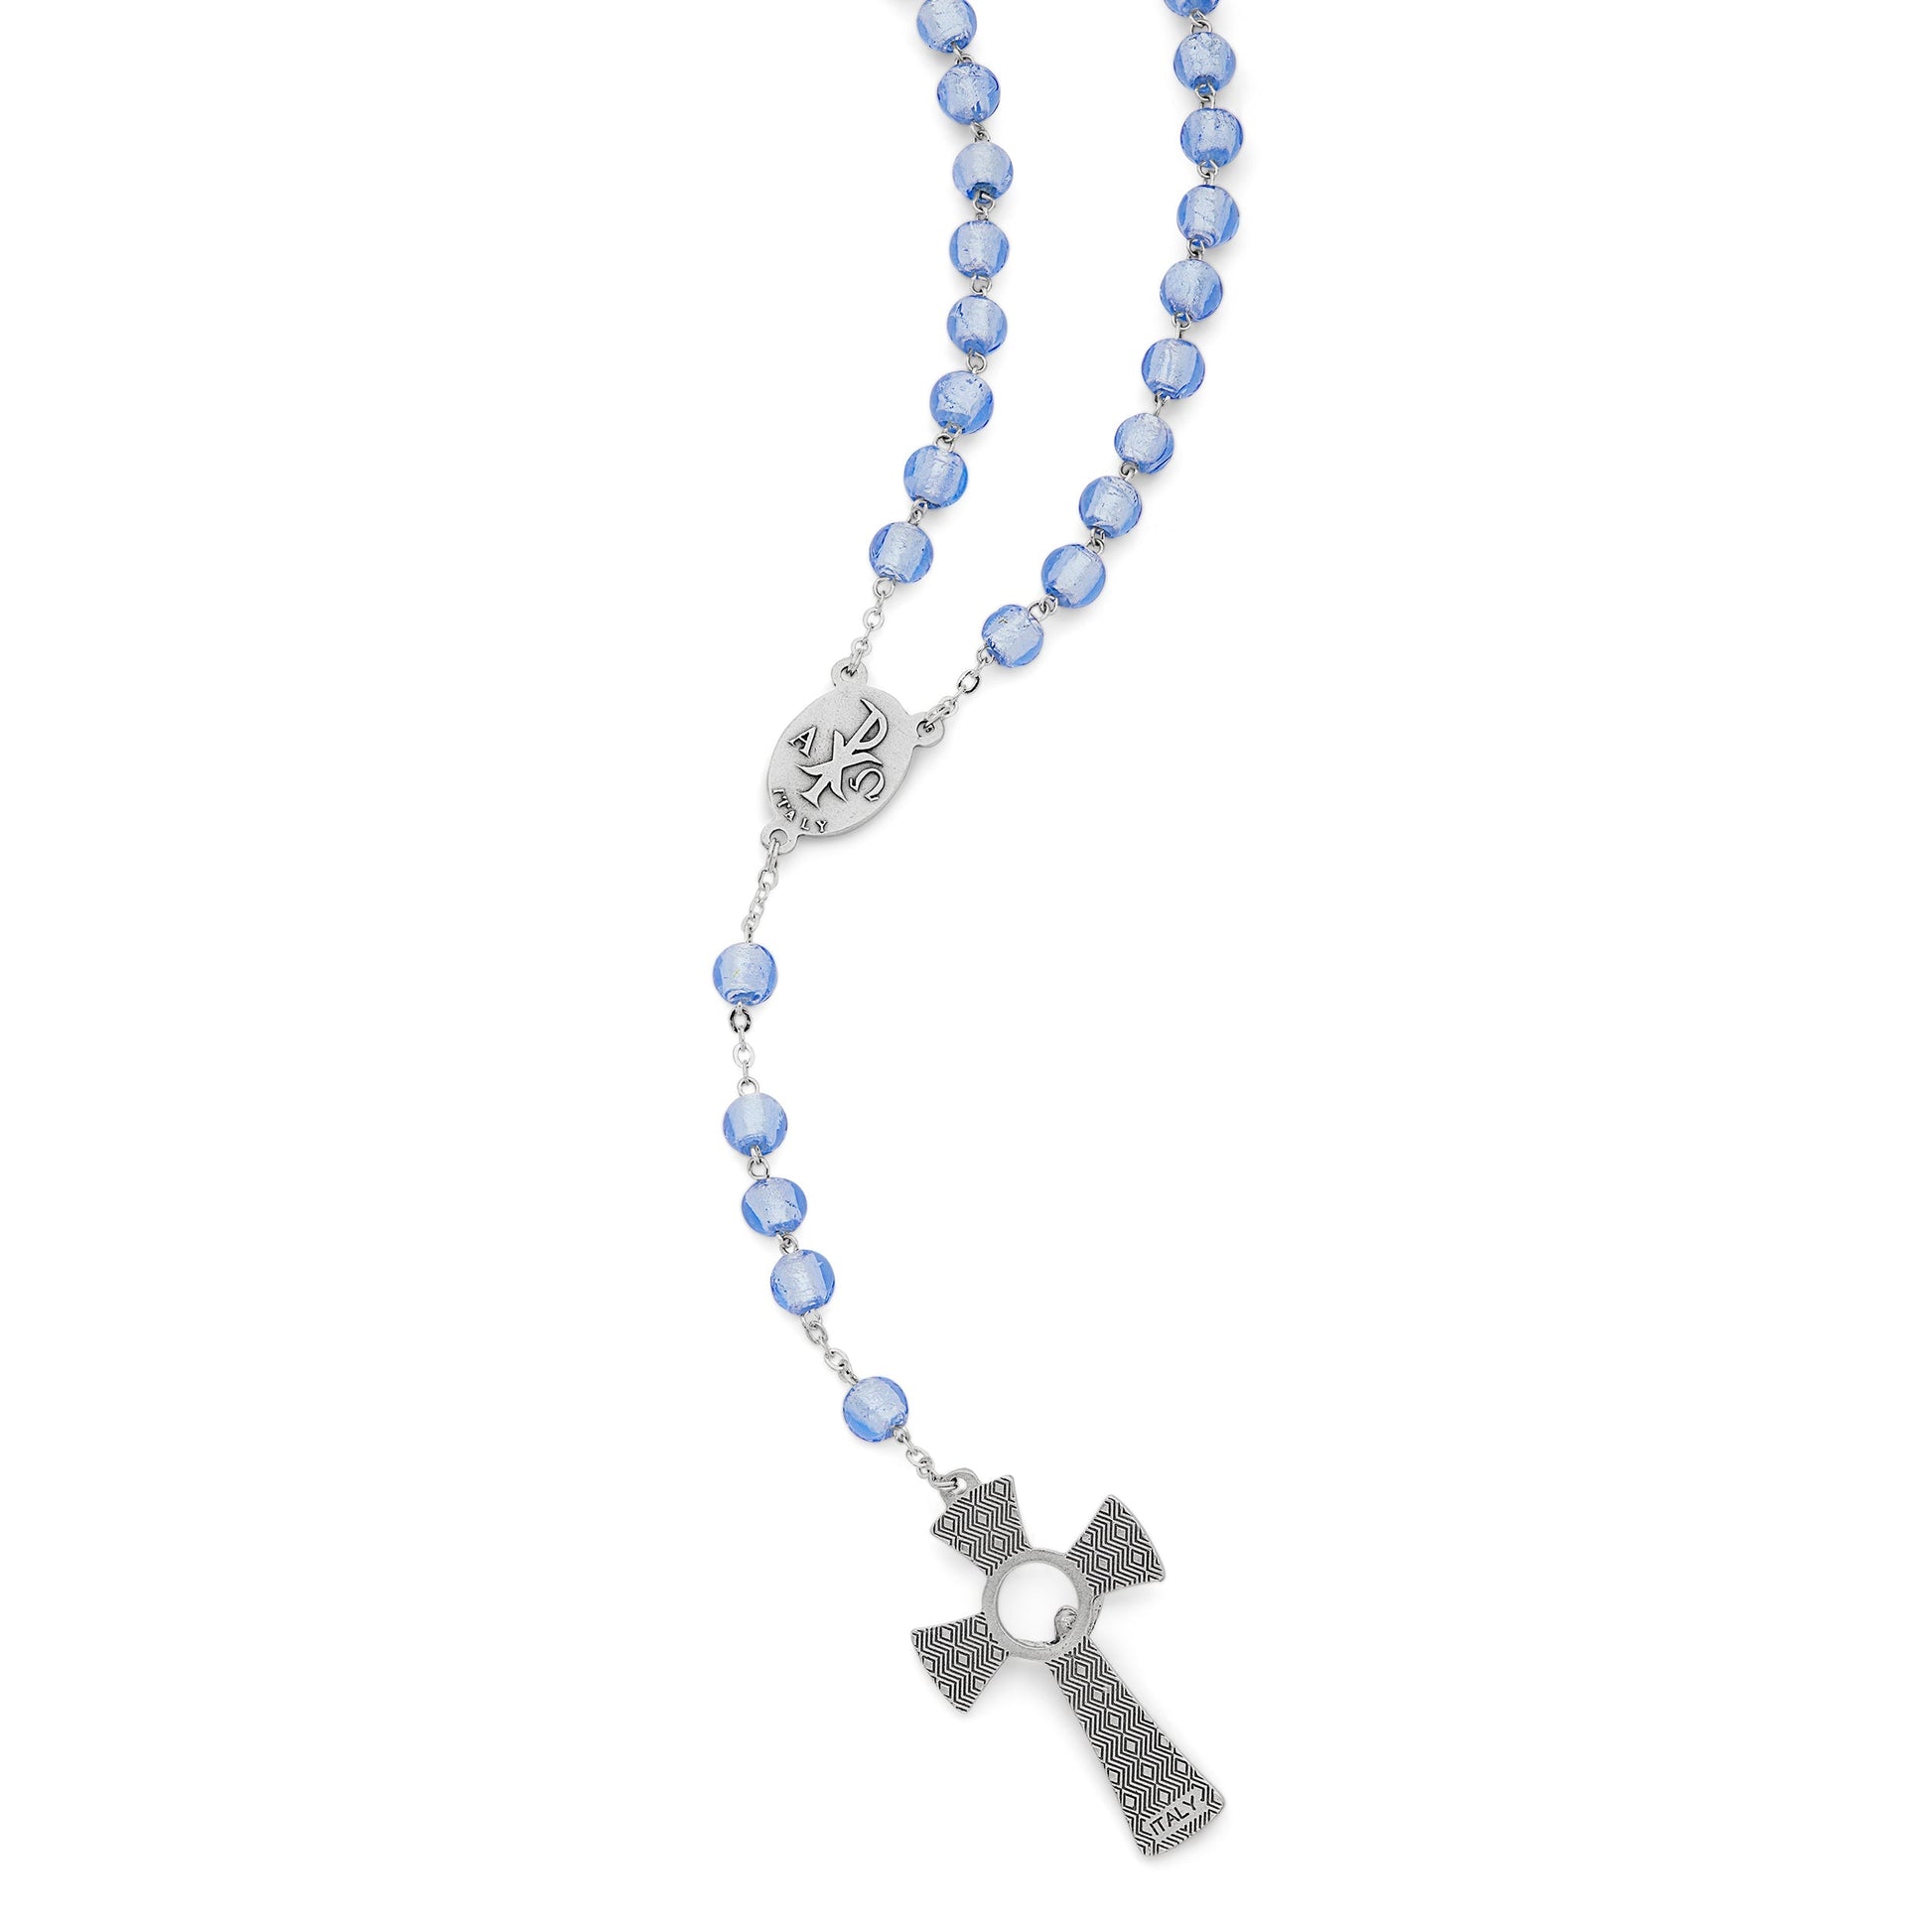 MONDO CATTOLICO Prayer Beads 53 cm (20.8 in) / 8 mm (o.31 in) Miraculous Virgin Rosary in Blue Murano Glass